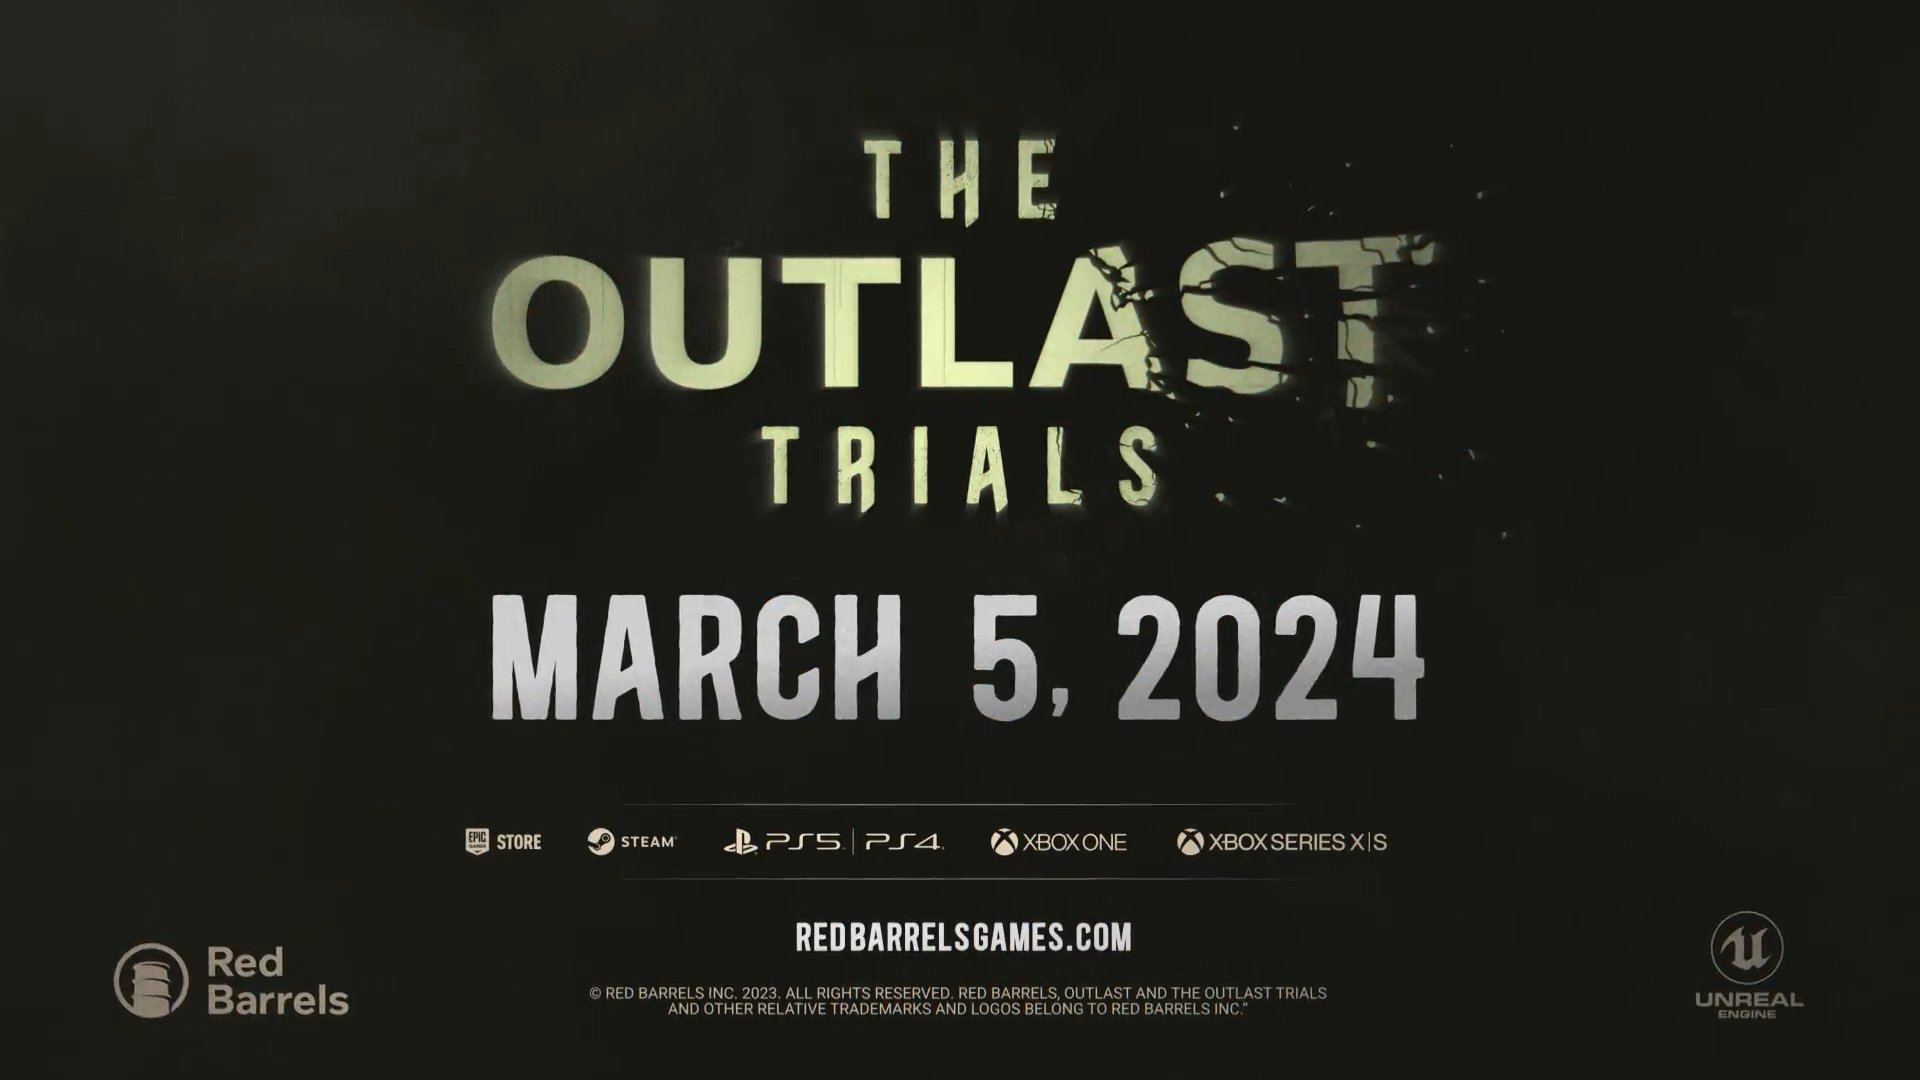 Red Barrels Announces The Outlast Trials Plans for Console